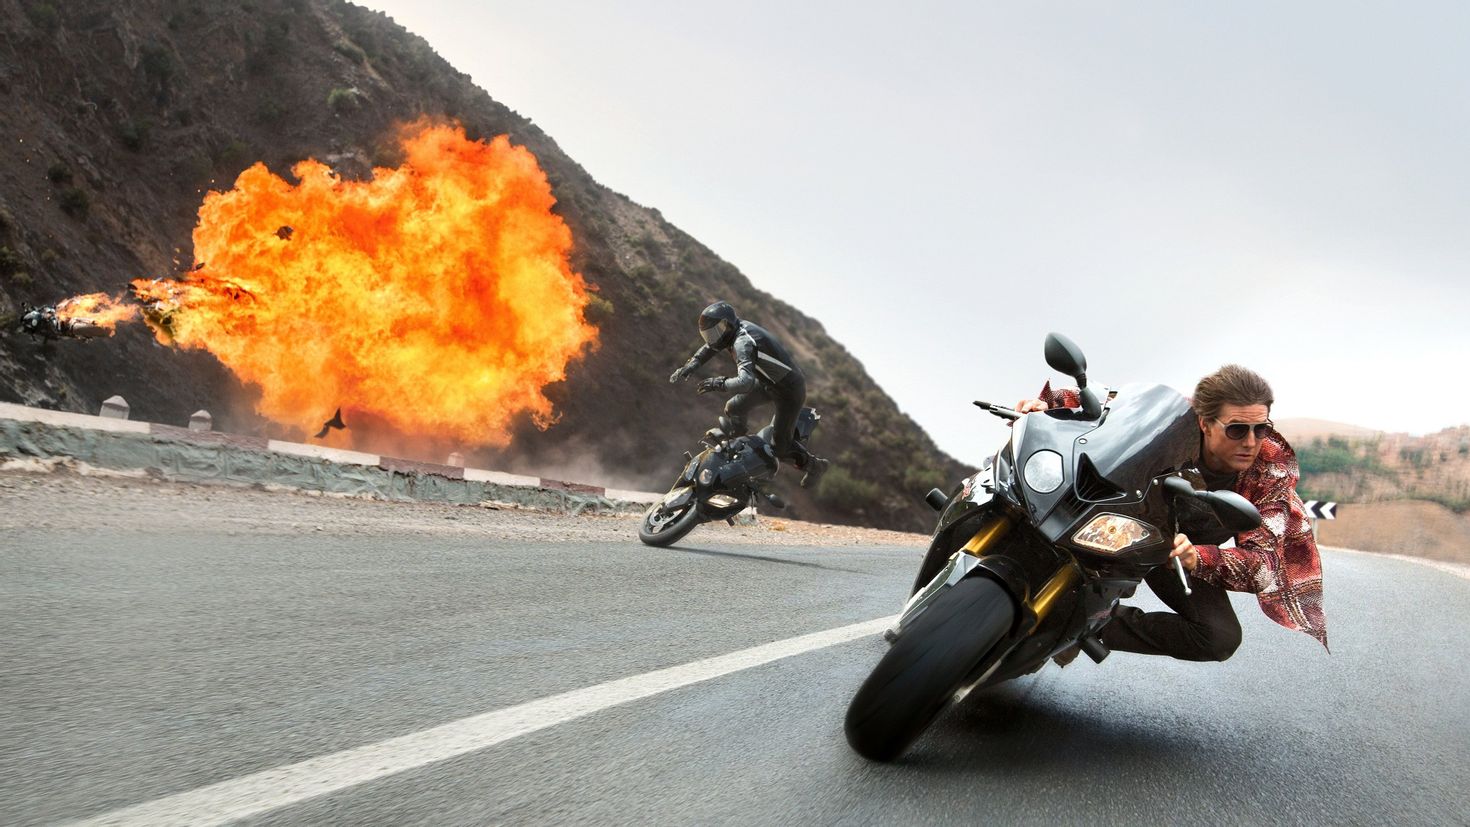 How Many Mission: Impossible Movies Are There?